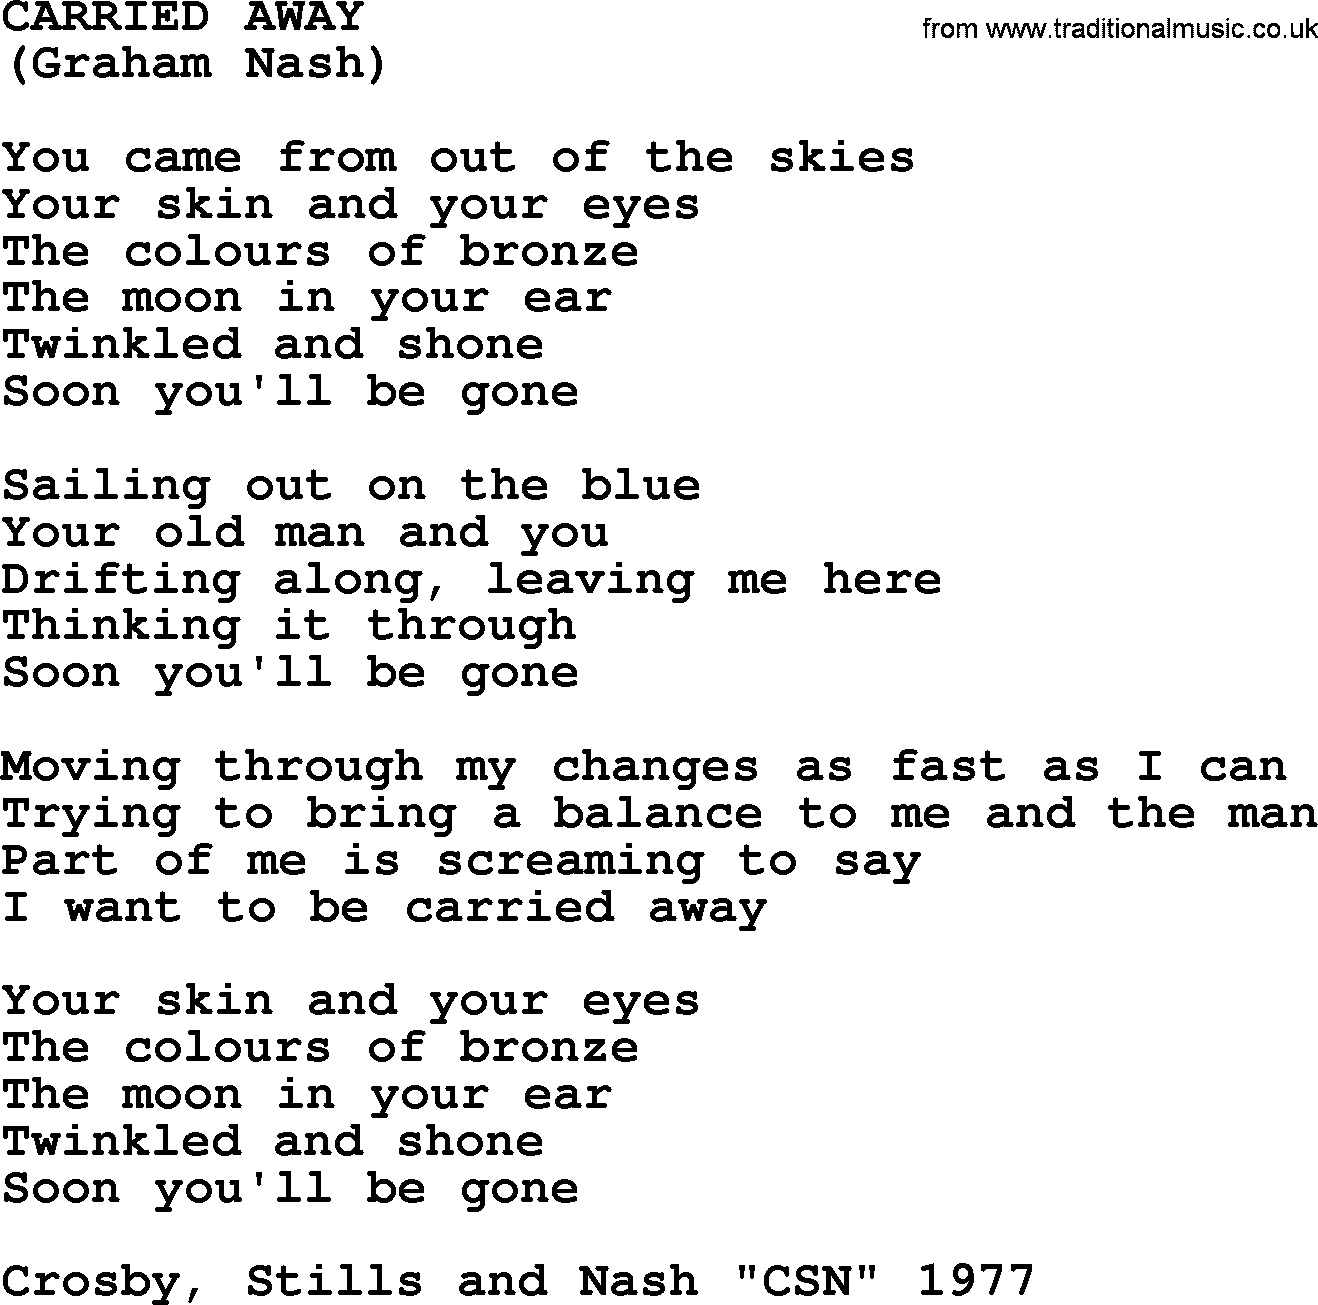 The Byrds song Carried Away, lyrics